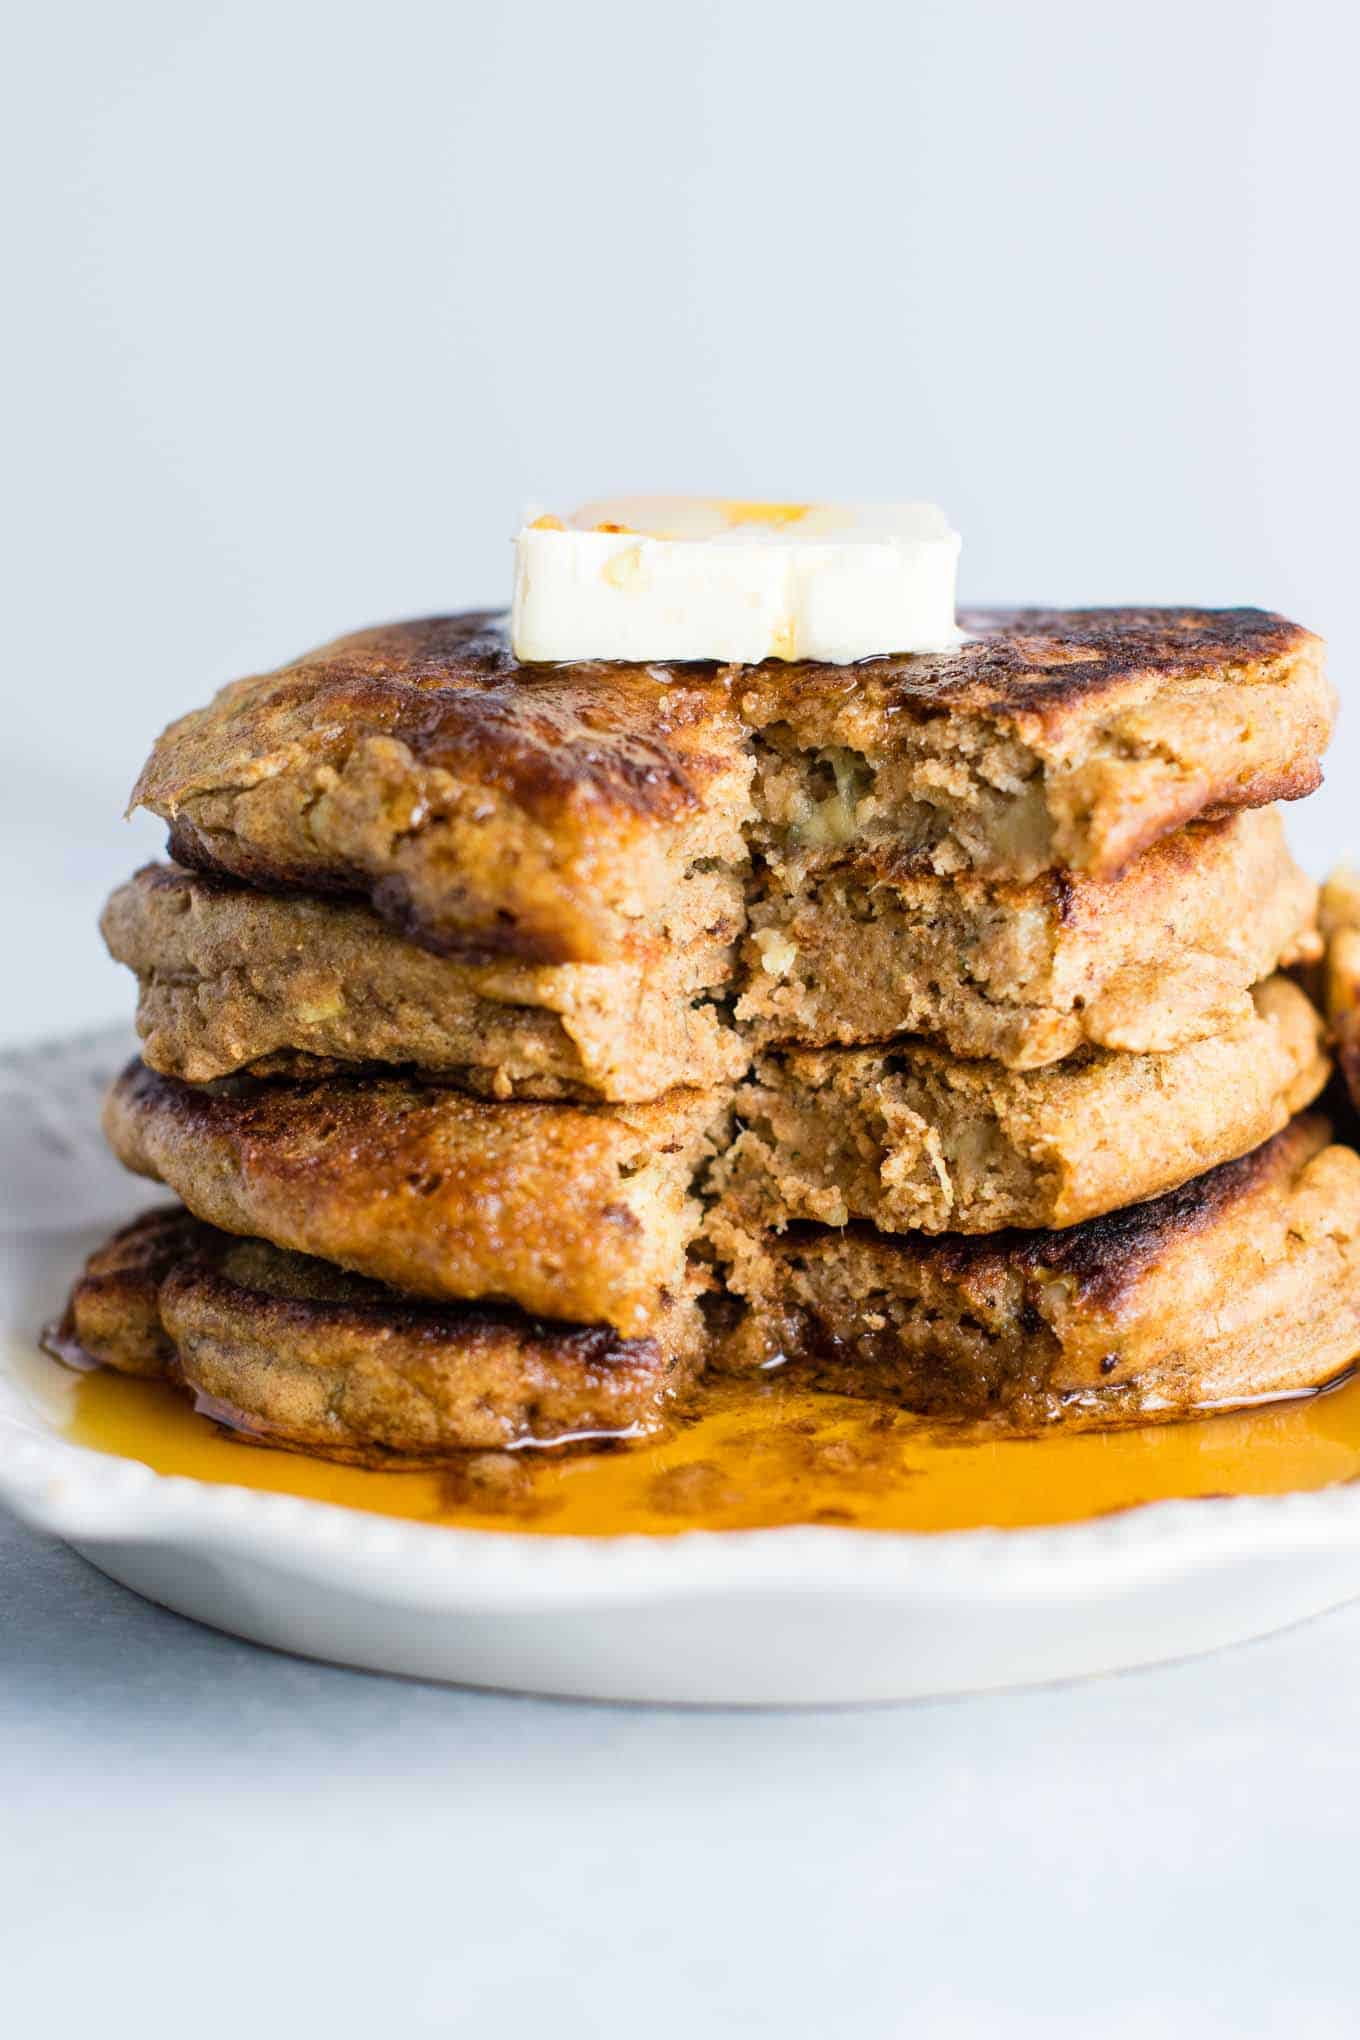 Healthy banana bread pancakes made with greek yogurt and whole wheat flour. These are amazing! #healthy #breakfast #bananabread #bananapancakes #pancakes #greekyogurt #wholewheat